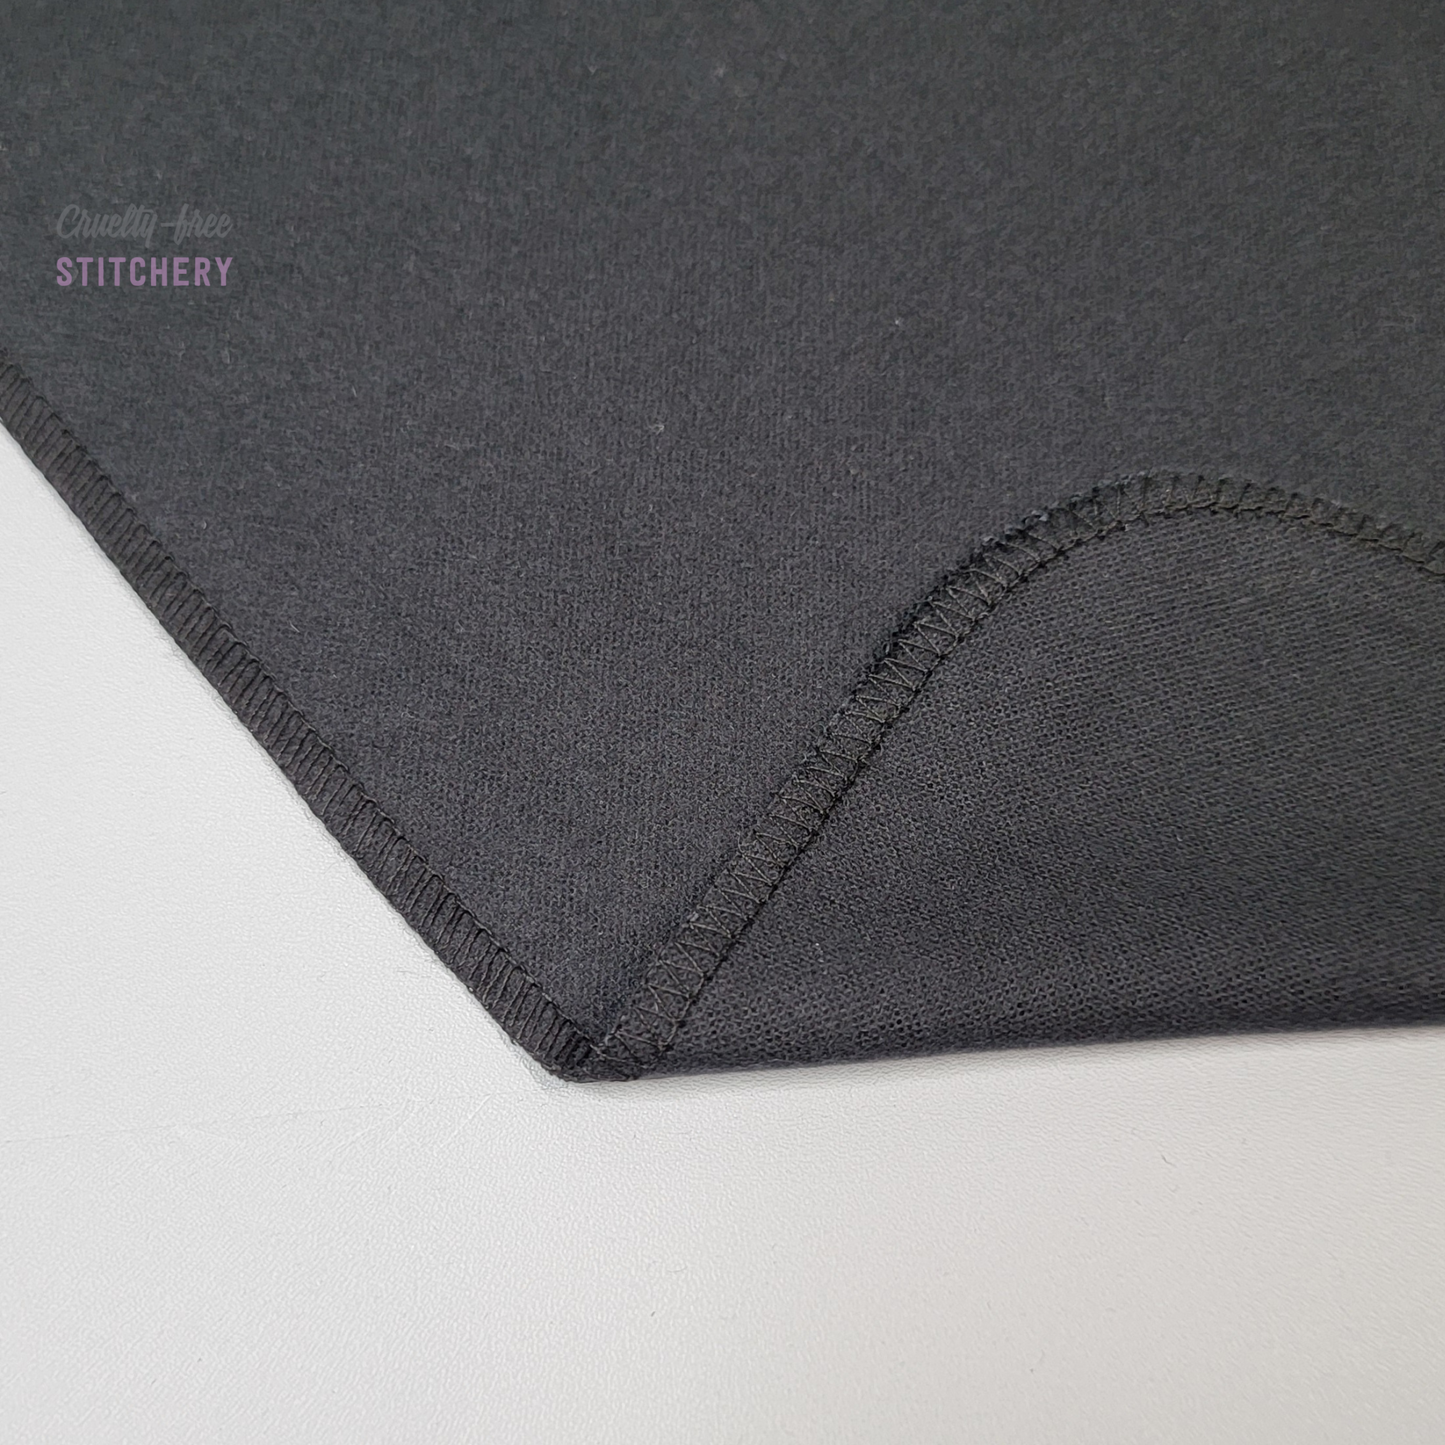 A black NonPaper Towel with the corner folded up to show the stitching and that the back side is solid black. The stitching is black.